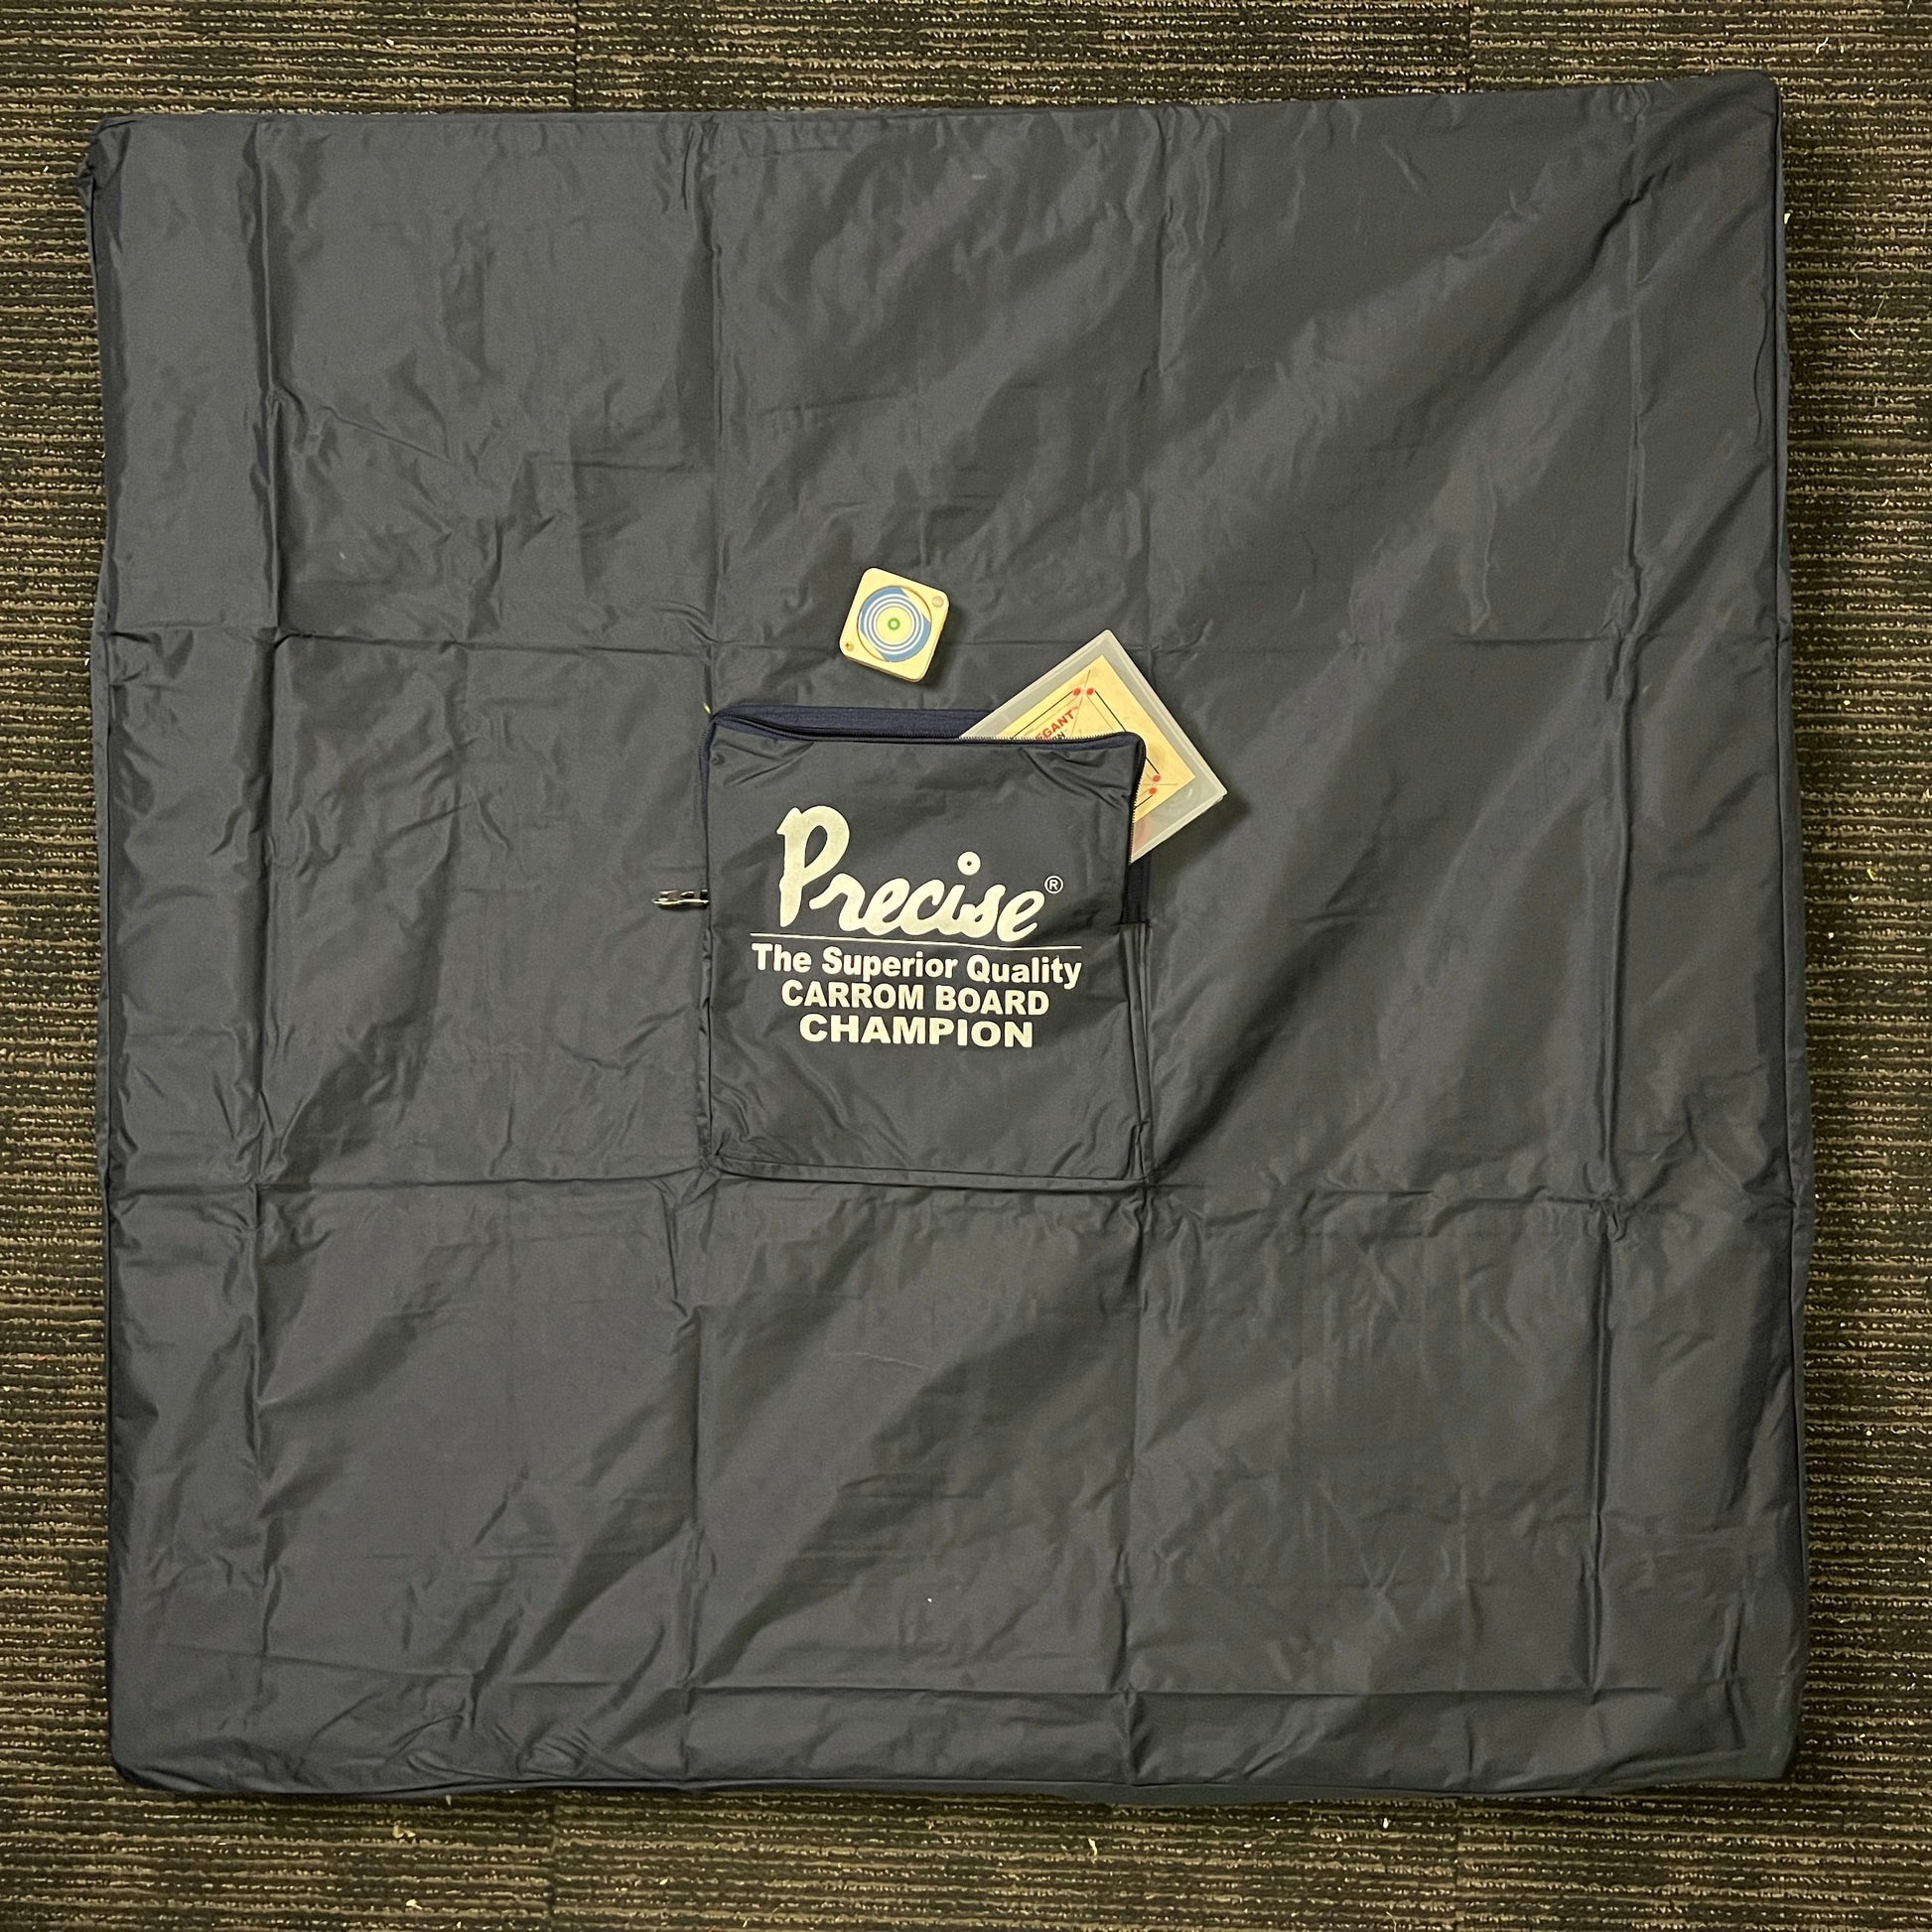 Protective cover made of heavy quality rexine for 35x35 inch carrom boards, with a storage pocket for carrommen and other accessories, available in 3 sizes.